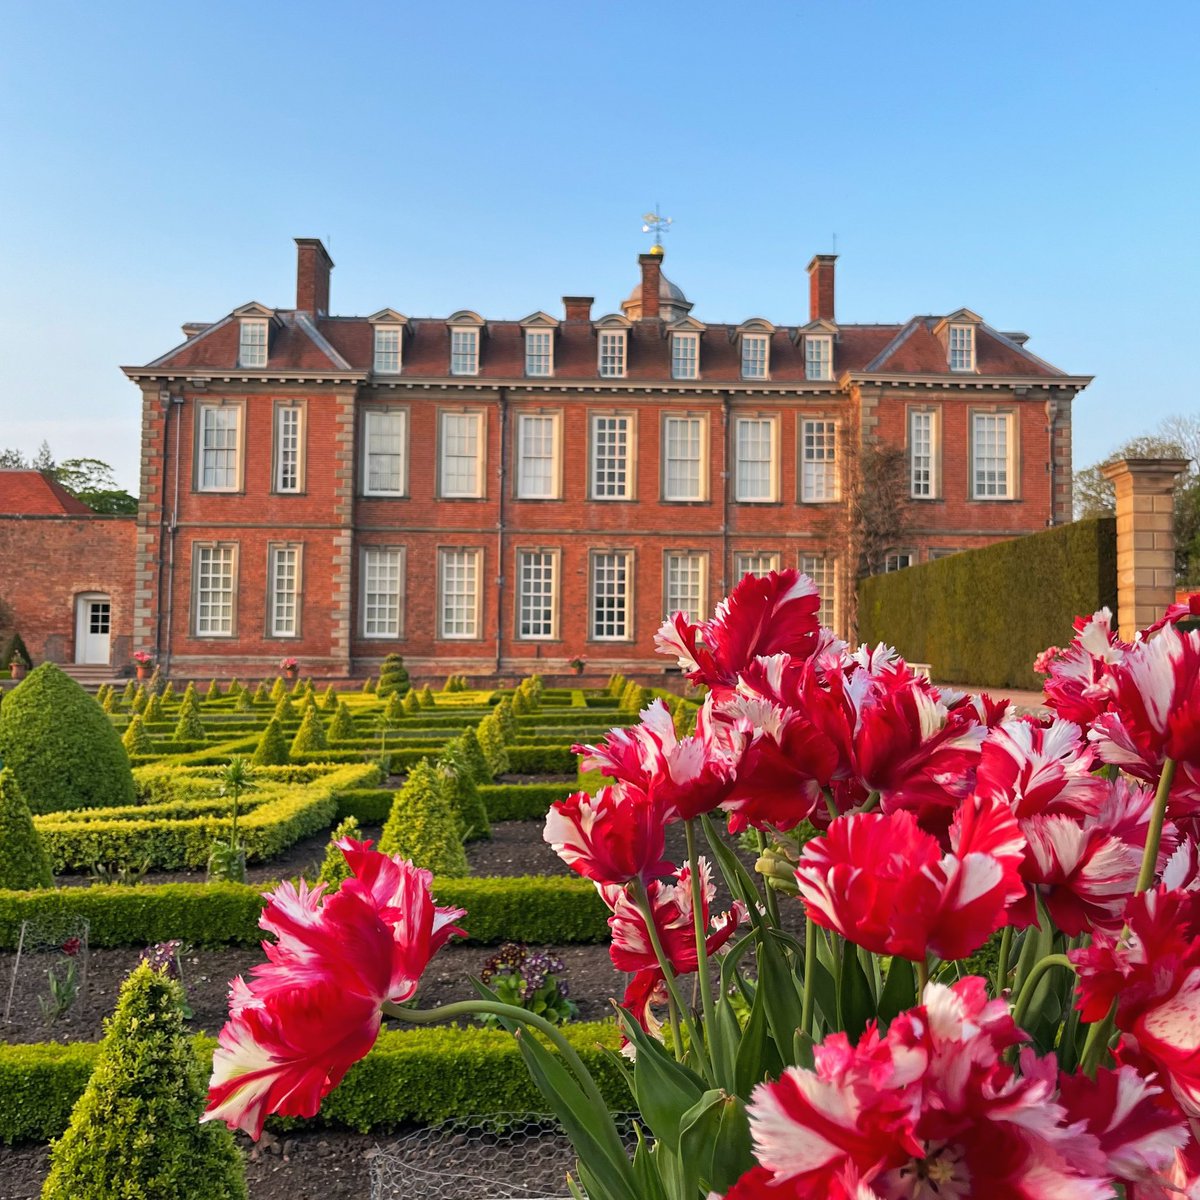 We’re absolutely loving this glorious weather and it’s set to continue this weekend so why not come join us at Hanbury Hall to soak up the sun in the beautiful gardens 😍☀️

Plan your visit 🔗 nationaltrust.org.uk/visit/worceste…

#gardens #fridayfeeling #hanburyhallnt #worcestershirehour